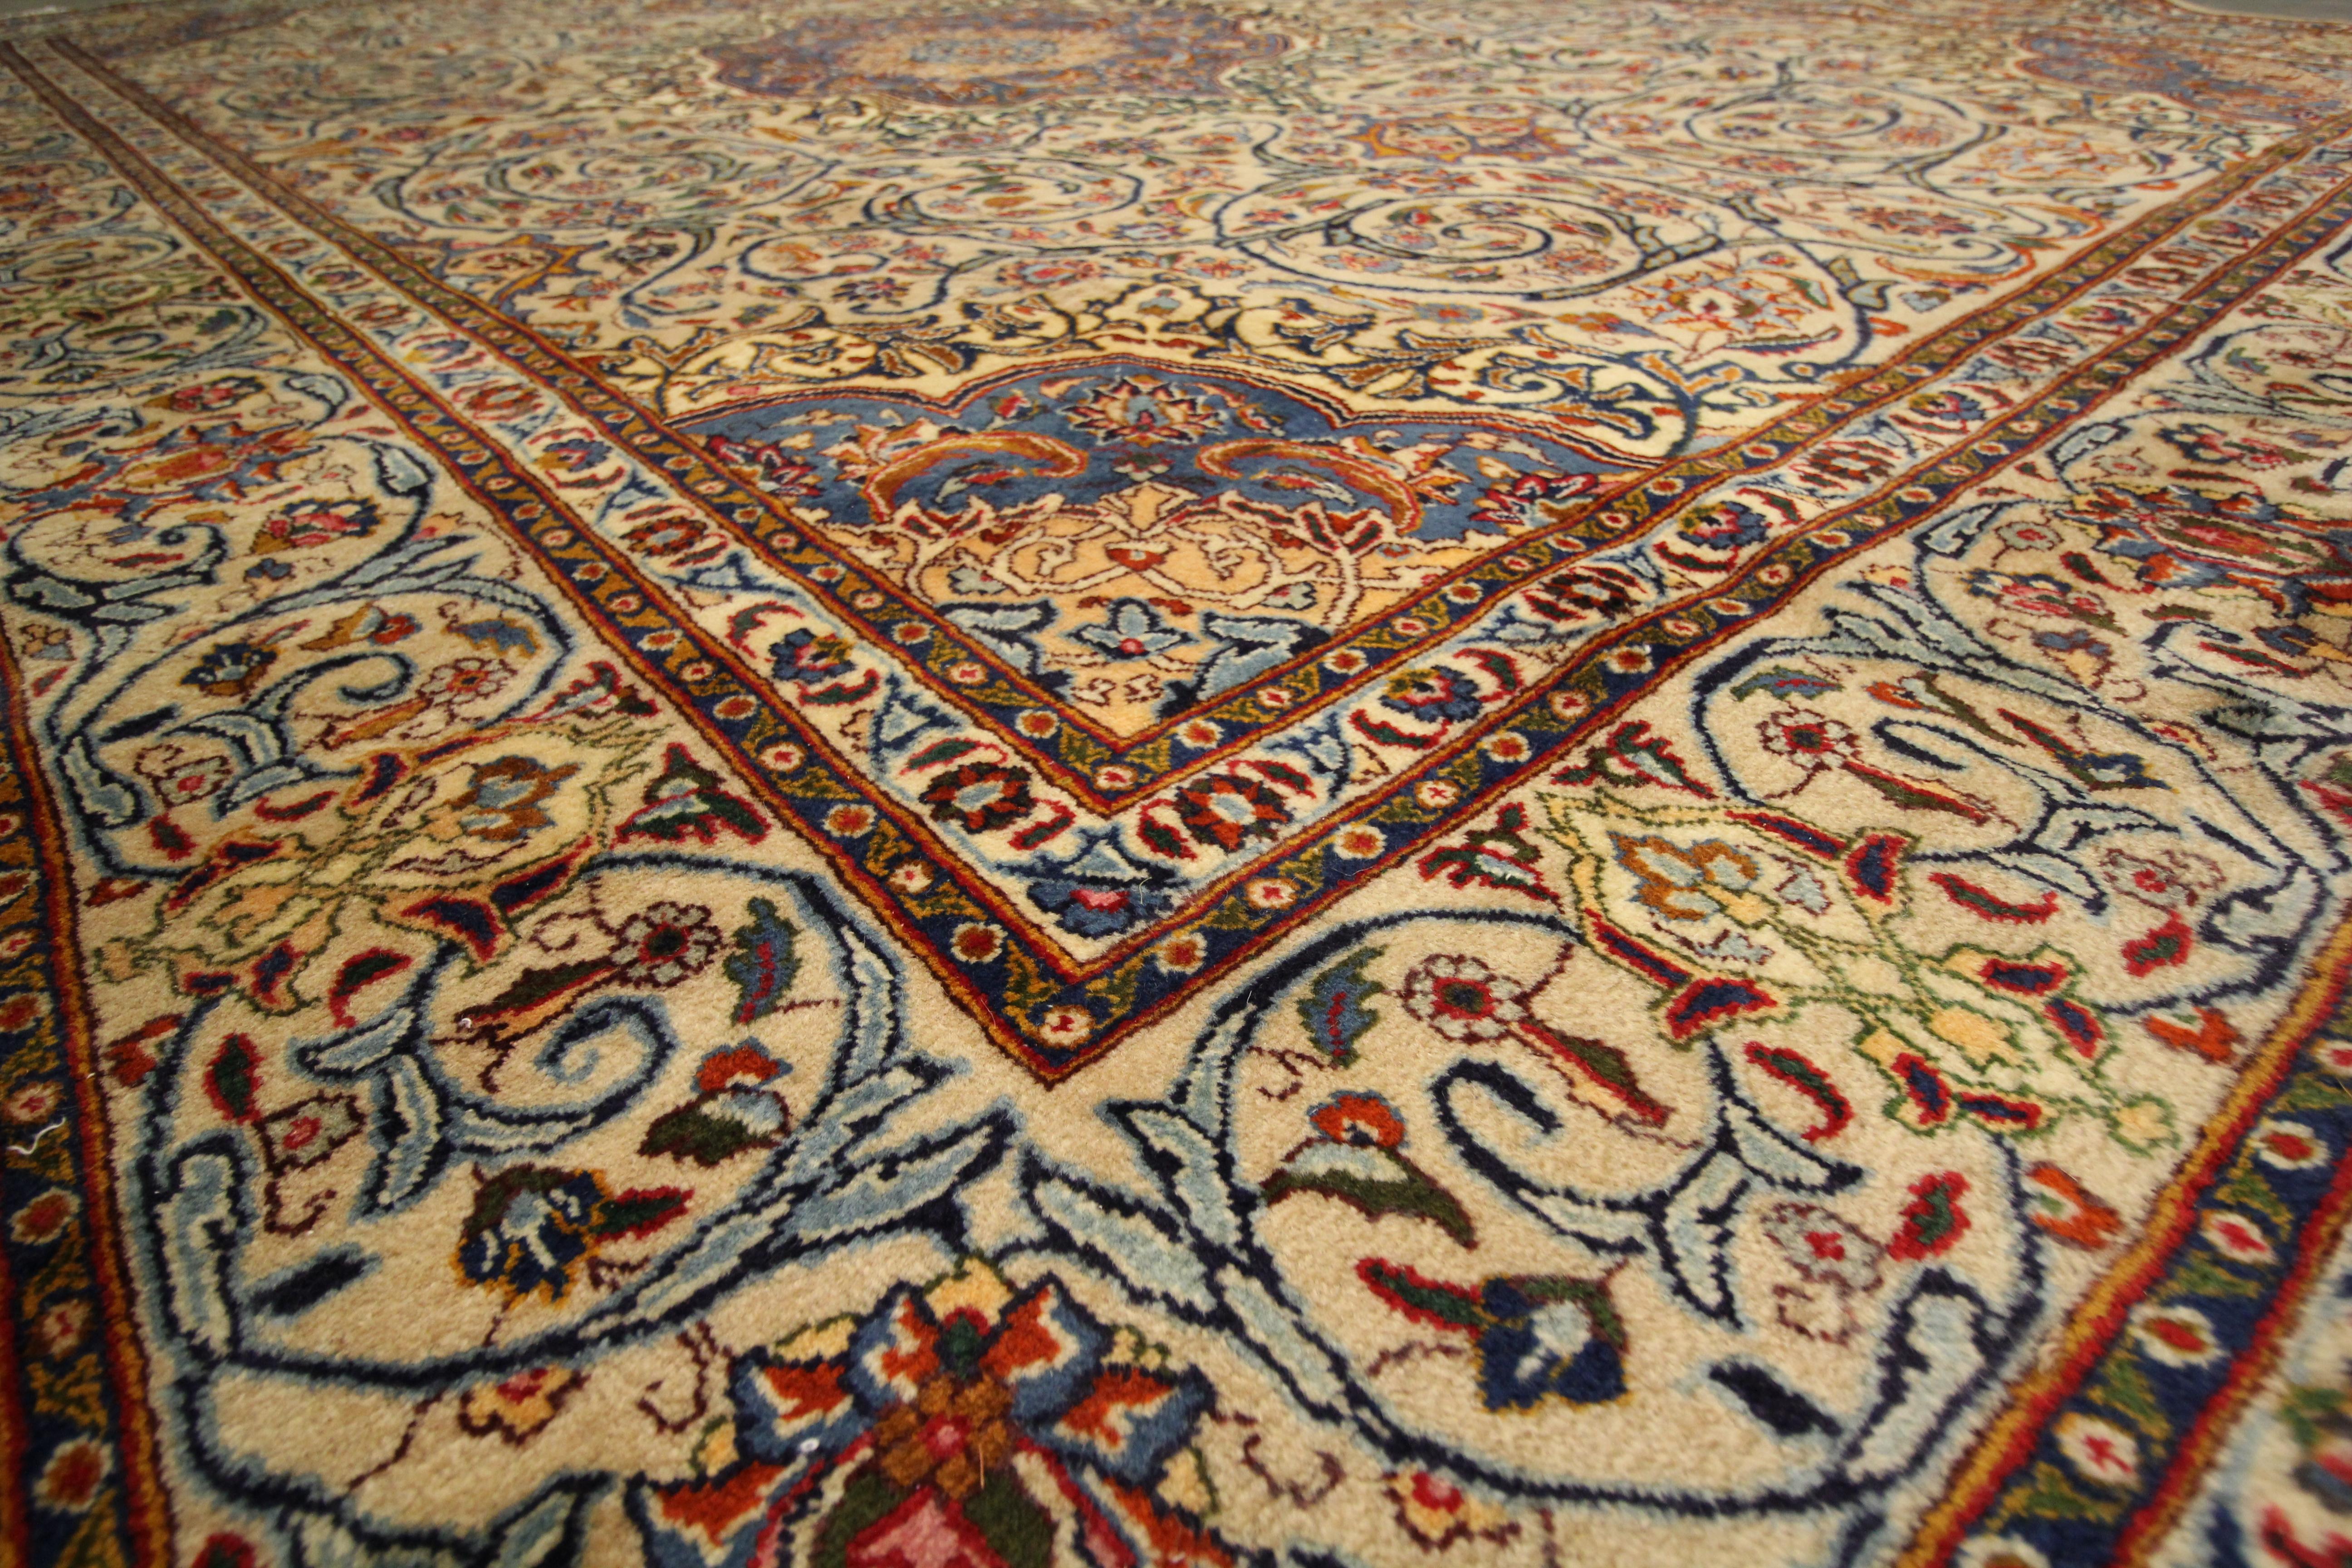 This fine wool area rug is a fantastic example of vintage rugs woven in the mid 20th century, circa 1950. This piece has a unique colour palette and bold, symmetrical design. Woven with a cream background and blue, golf, rust and brown accents that